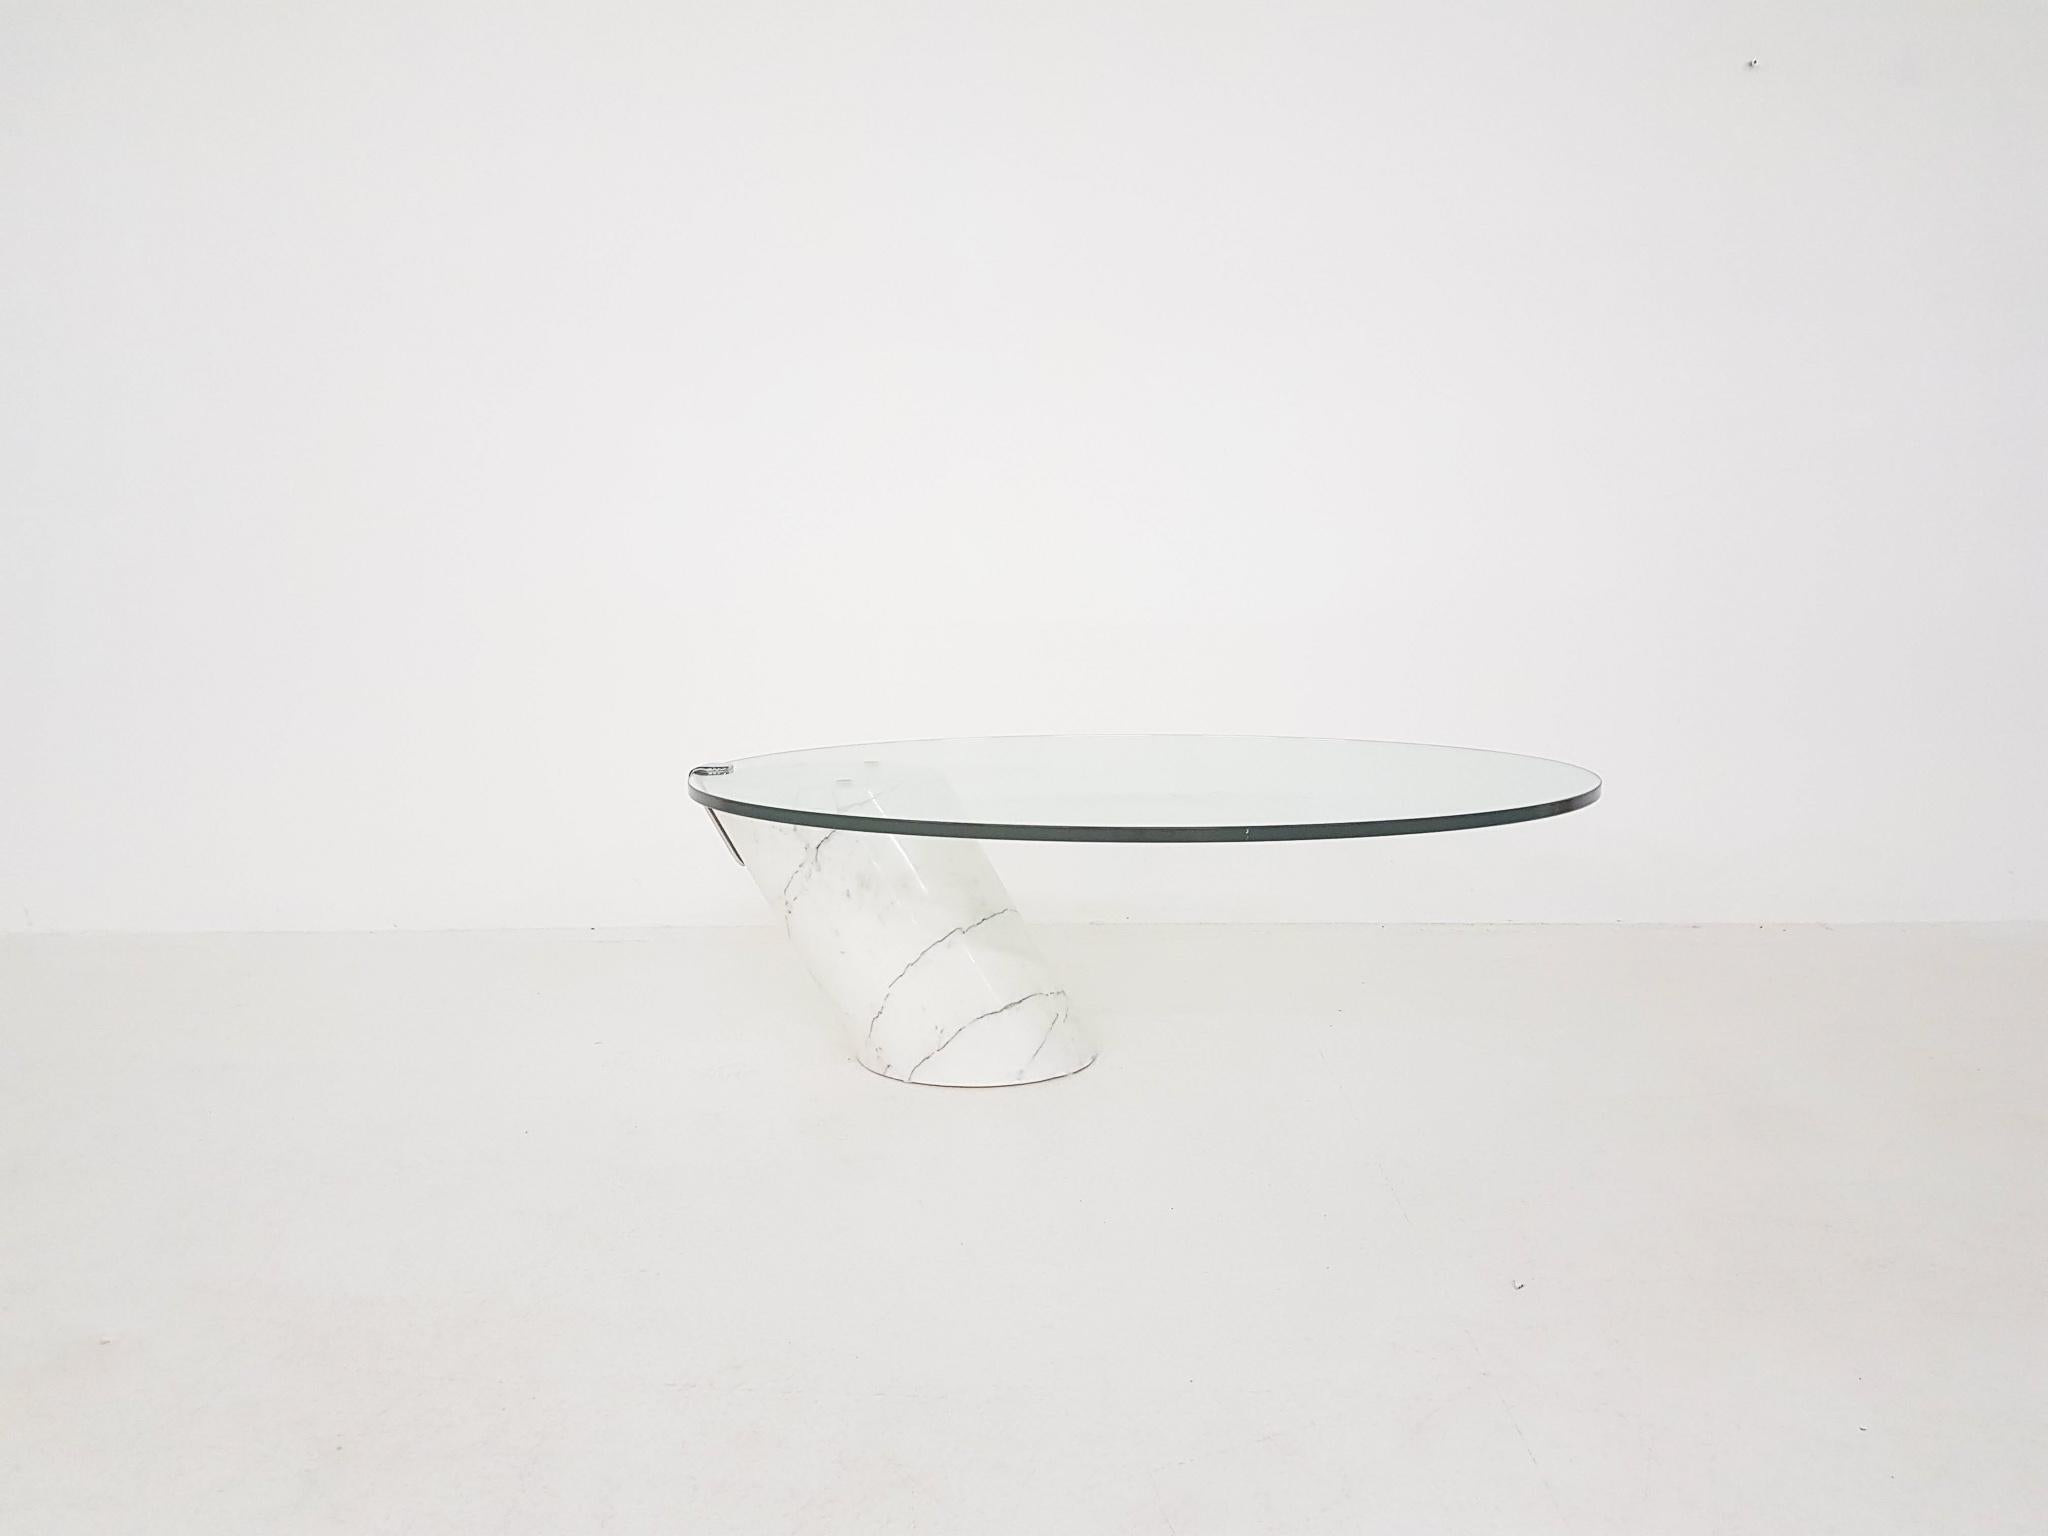 Heavy coffee table made of a massive marble base with a thick glass top. This is a design by Team Form for Ronald Schmitt, Switzerland 1970s.

This design Classic has a glass top which looks like it is floating on top the marble base. The diagonal